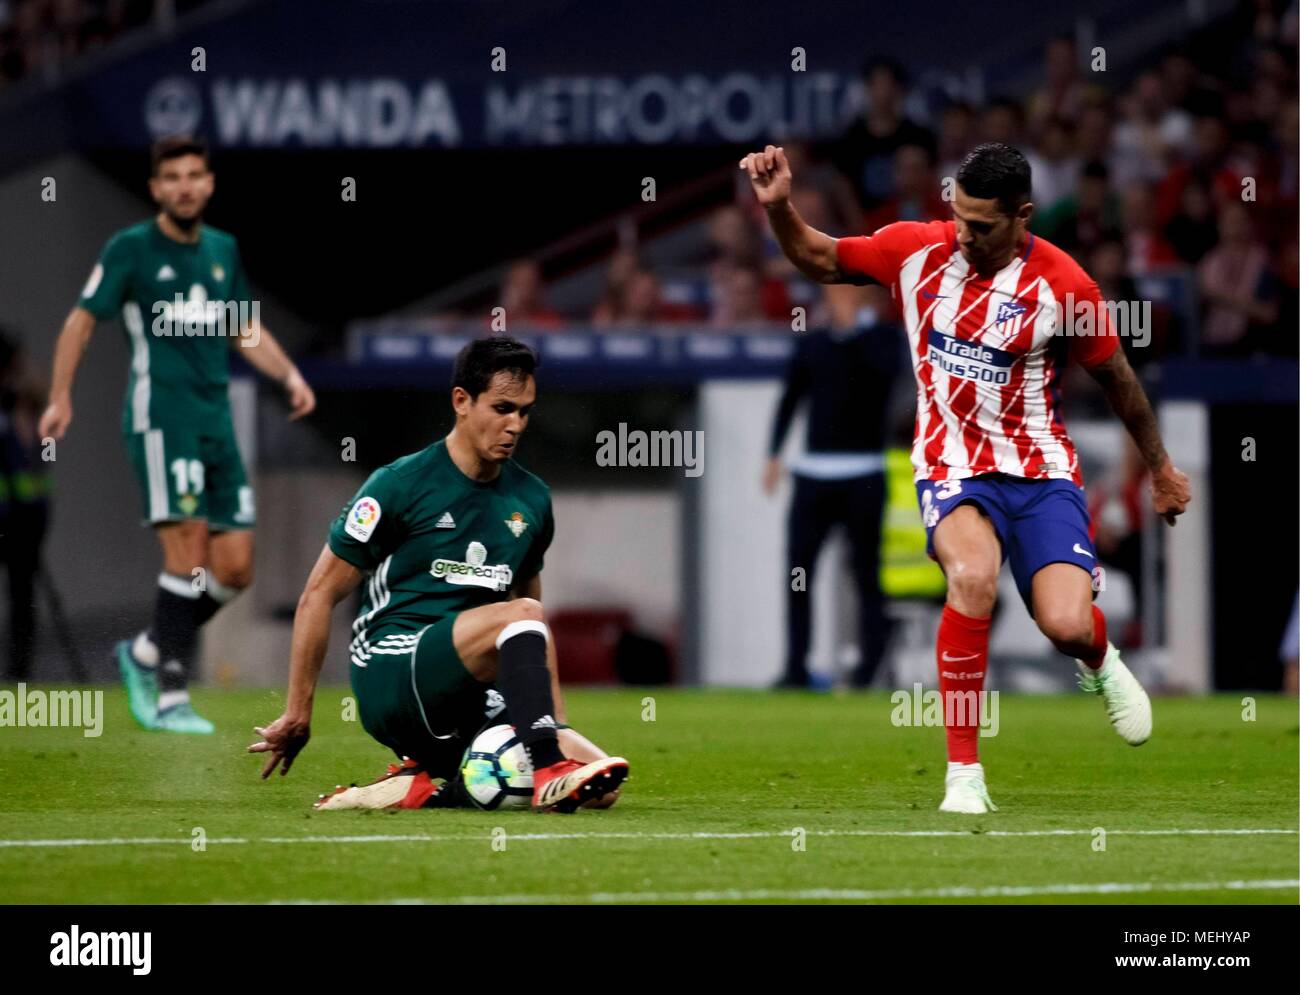 Vitolo of Atletico de Madrid and  Aissa Mandi of Real Betis  during the LaLiga 2017/18 match between Atletico de Madrid and Real Betis, at Wanda Metropolitano Stadium in Madrid on April 22, 2018. (Photo by Guille Martinez/Cordon Press)  Cordon Press Stock Photo